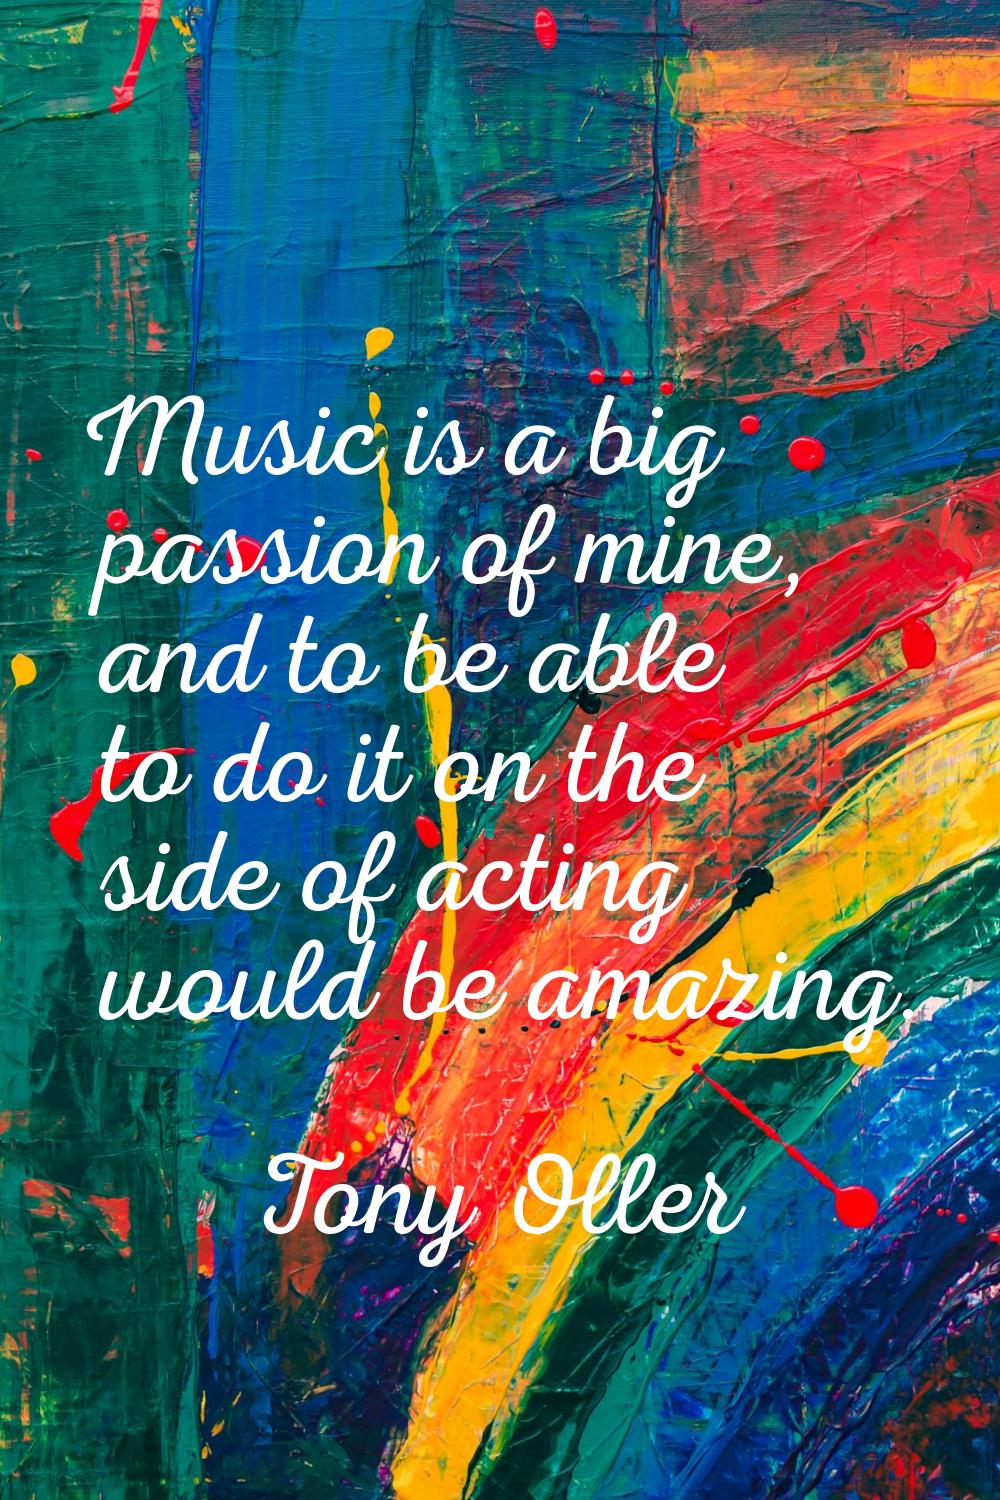 Music is a big passion of mine, and to be able to do it on the side of acting would be amazing.